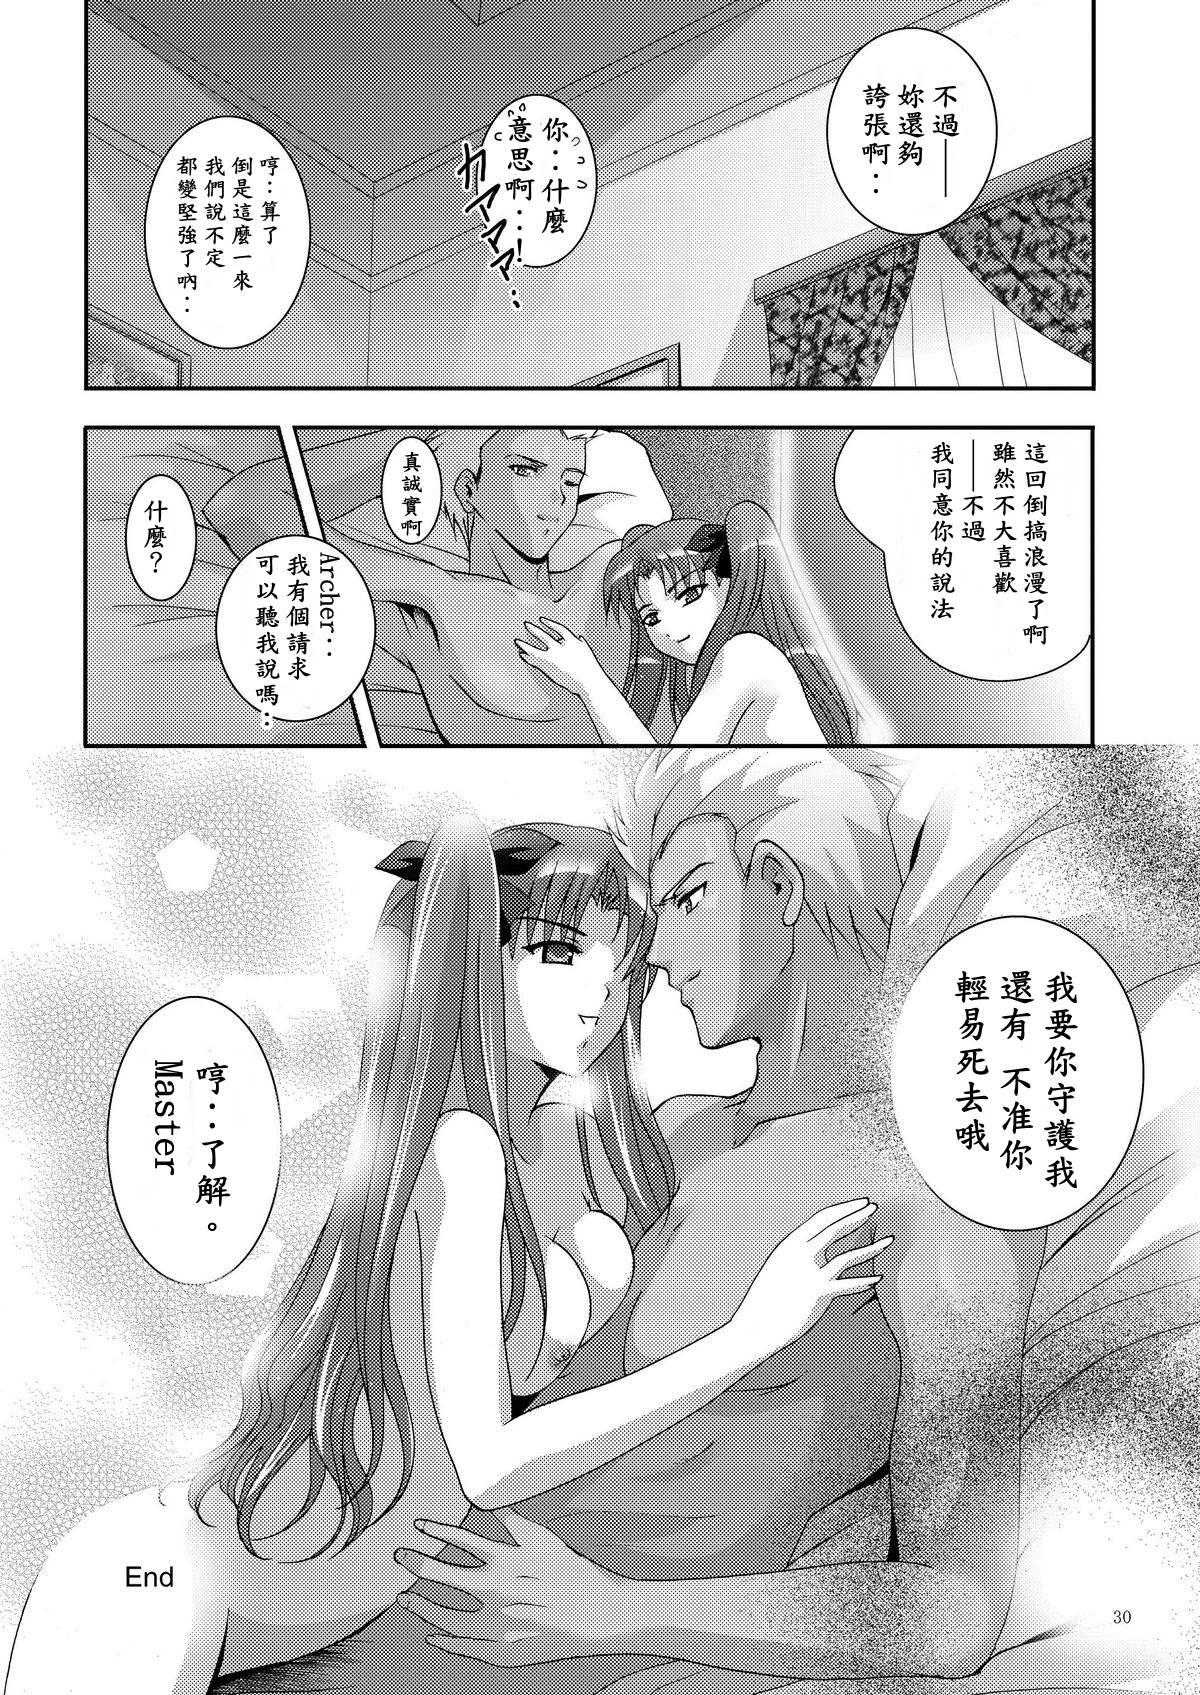 Roleplay MOUSOU THEATER 19 - Fate stay night Cash - Page 28